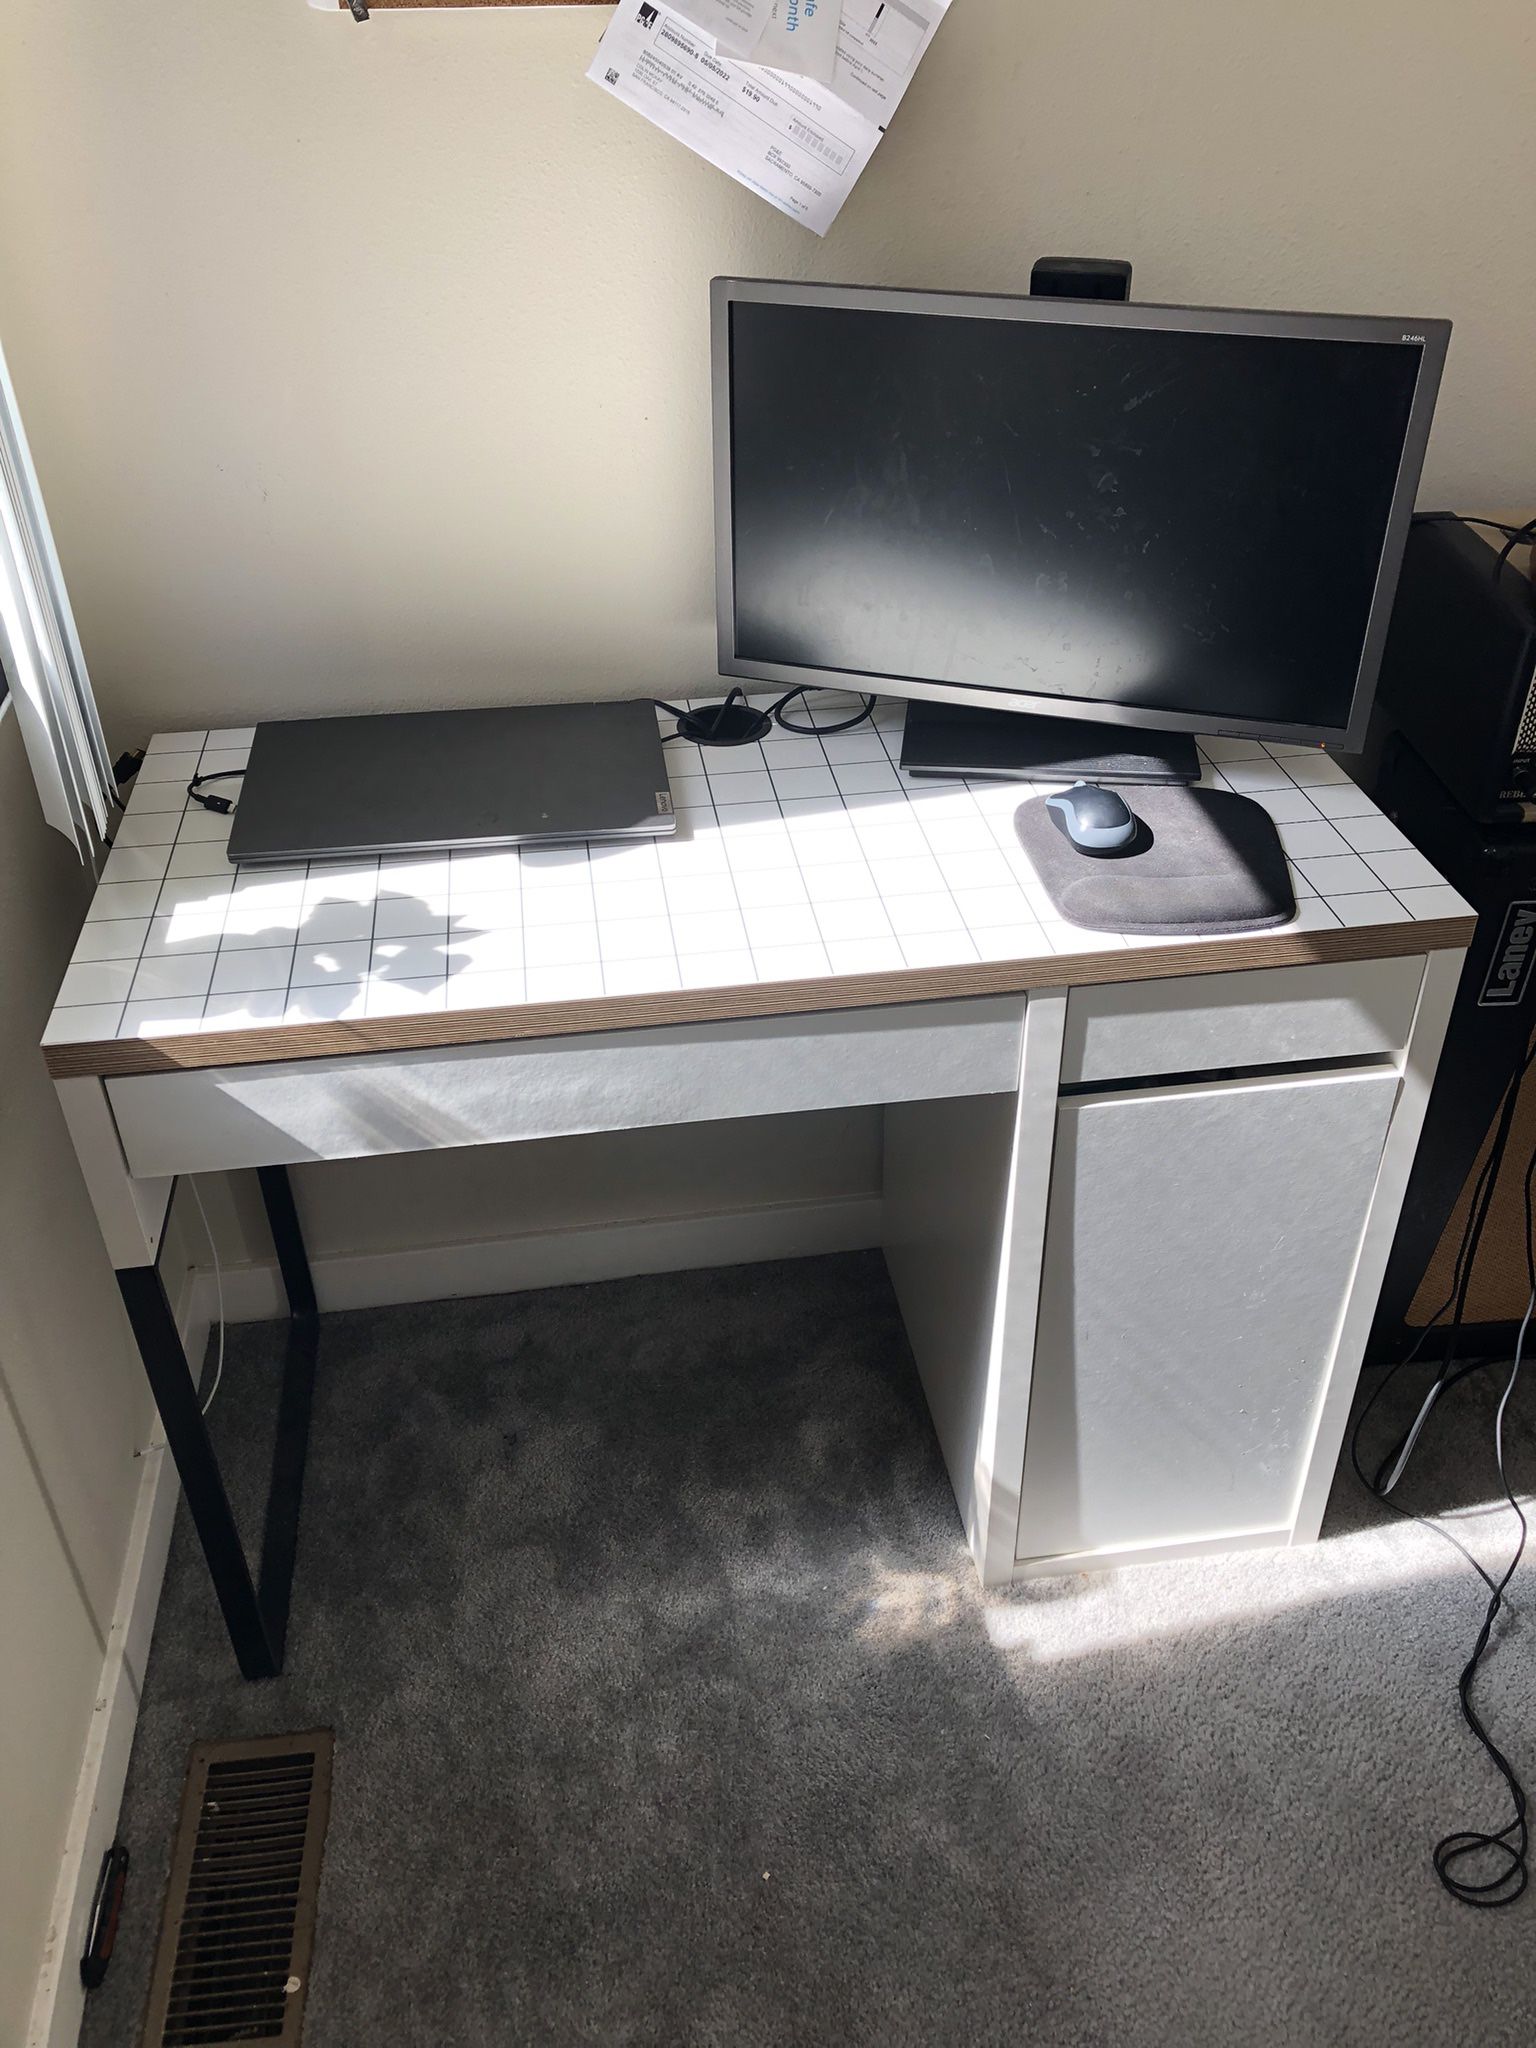 Desk And Monitor